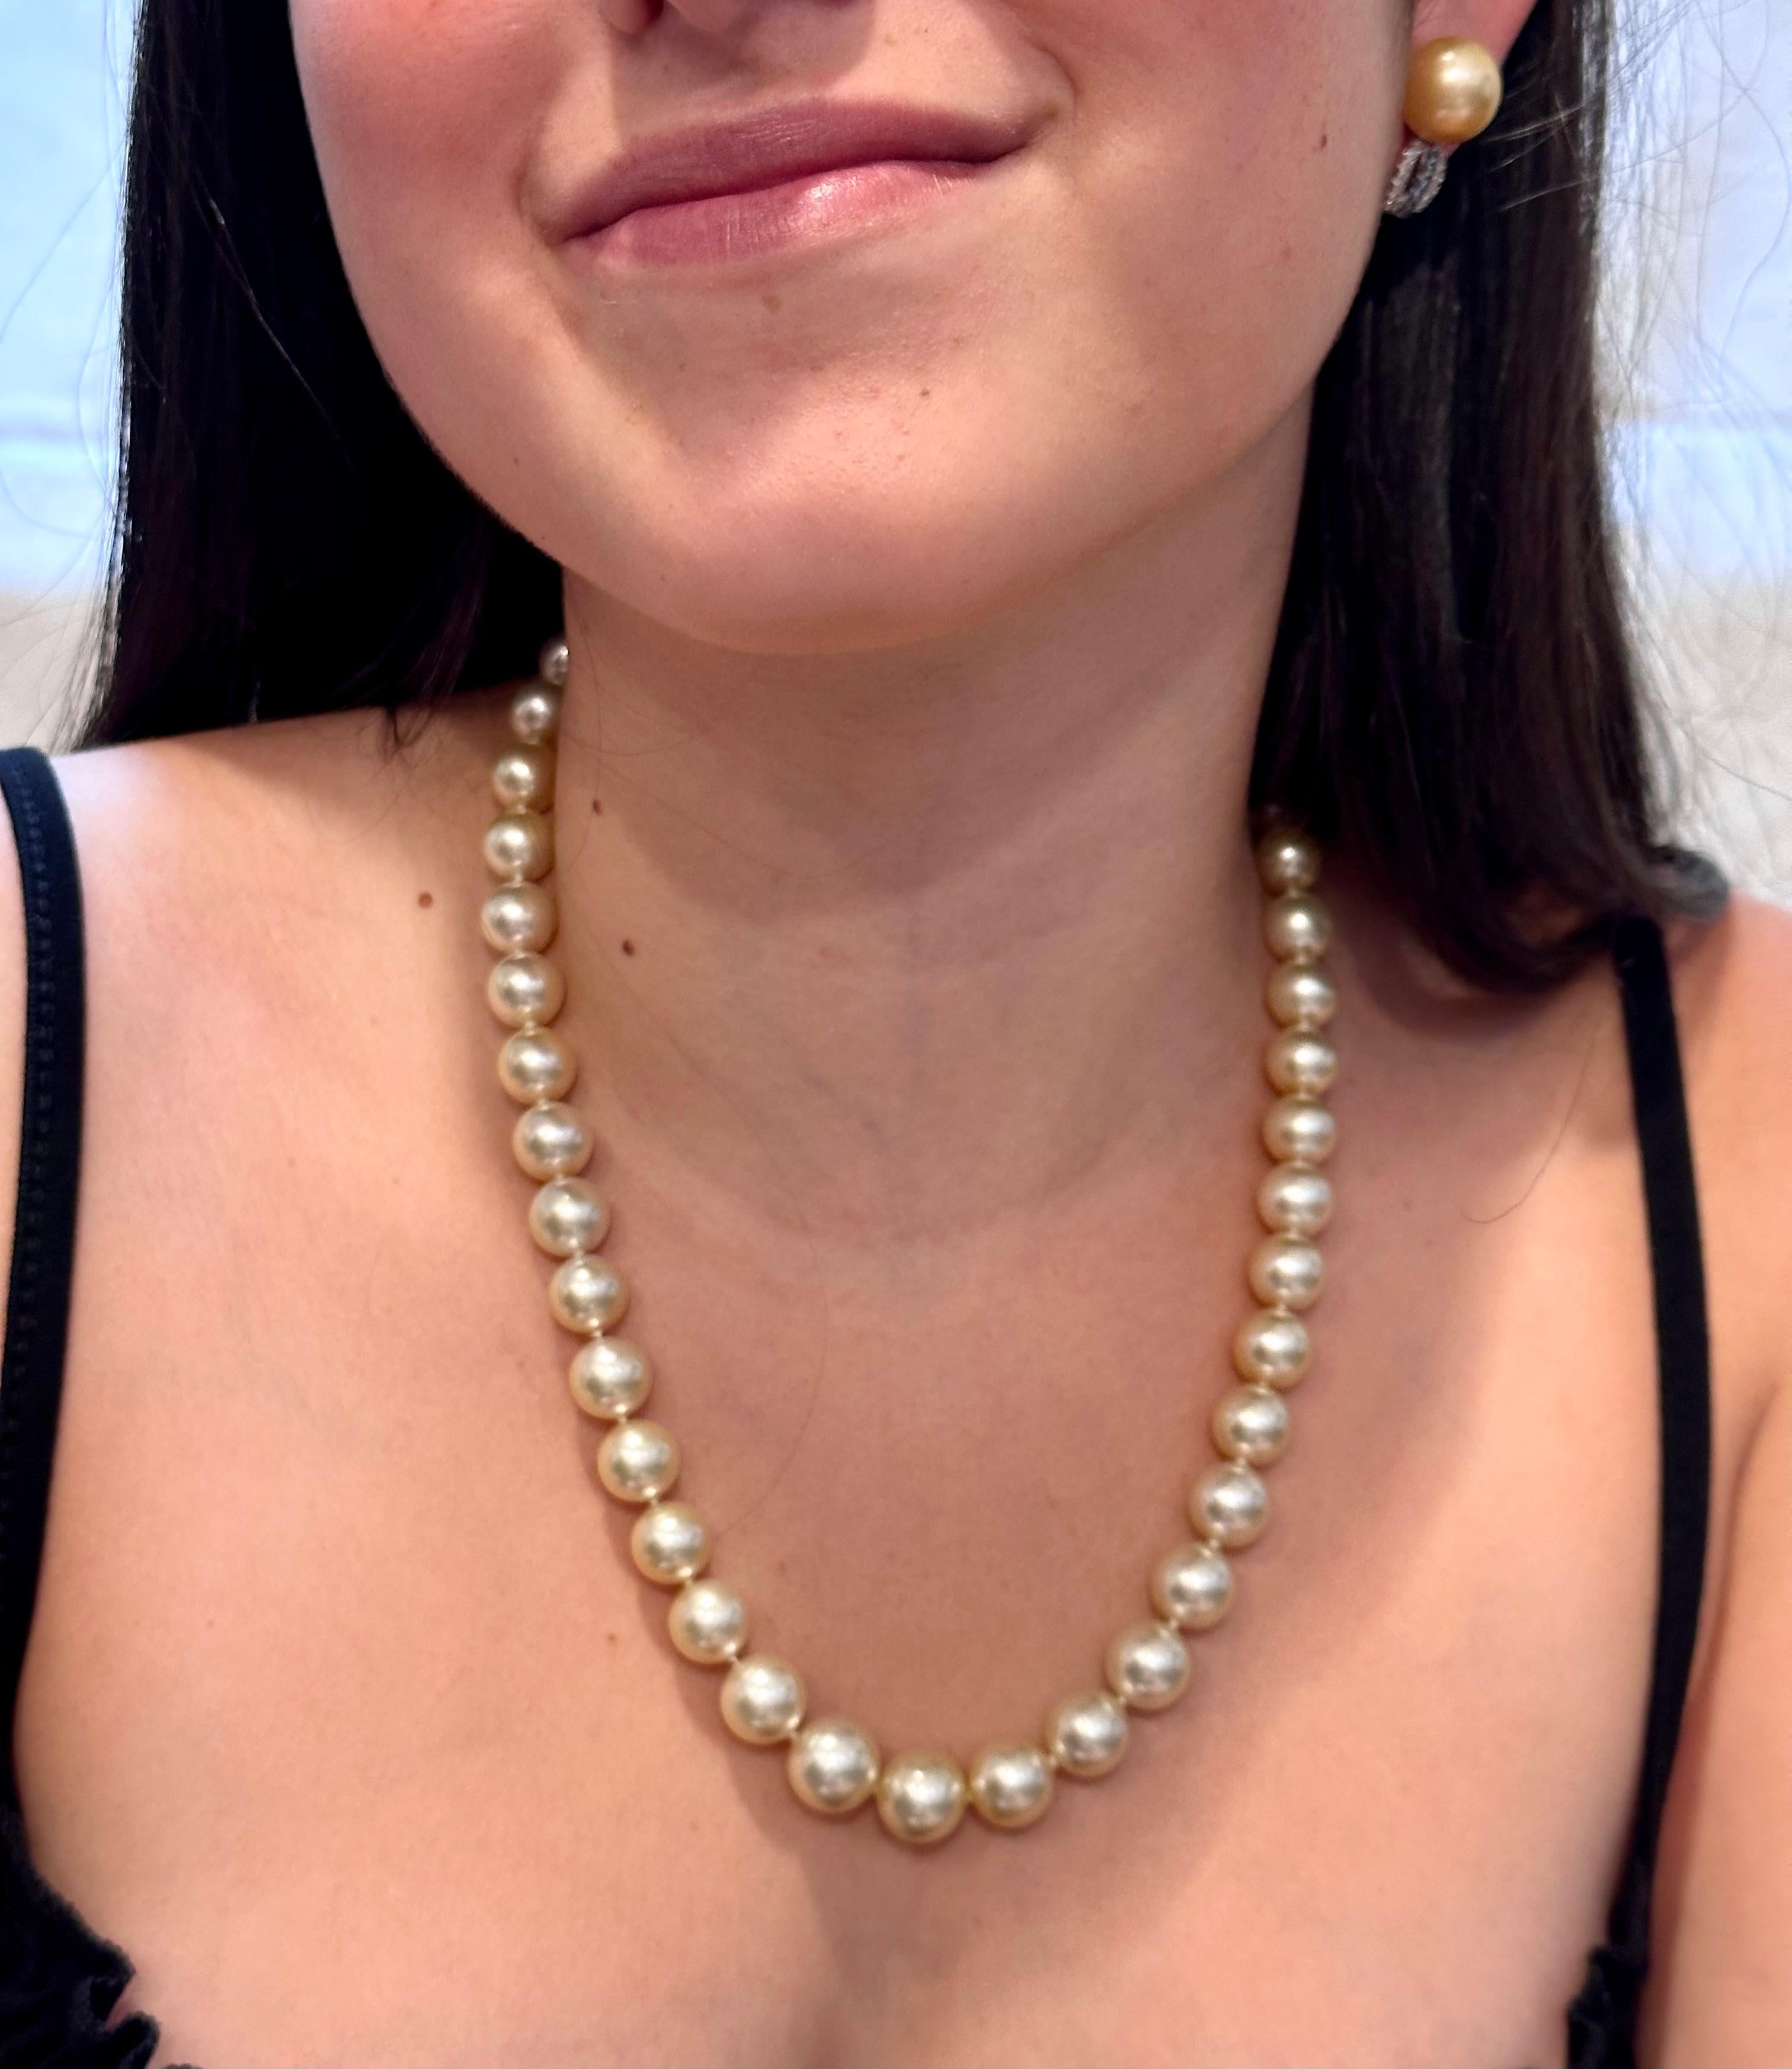 Golden South Sea Pearls 10-12 MM Strand Necklace 18 Kt Gold  Clasp 18